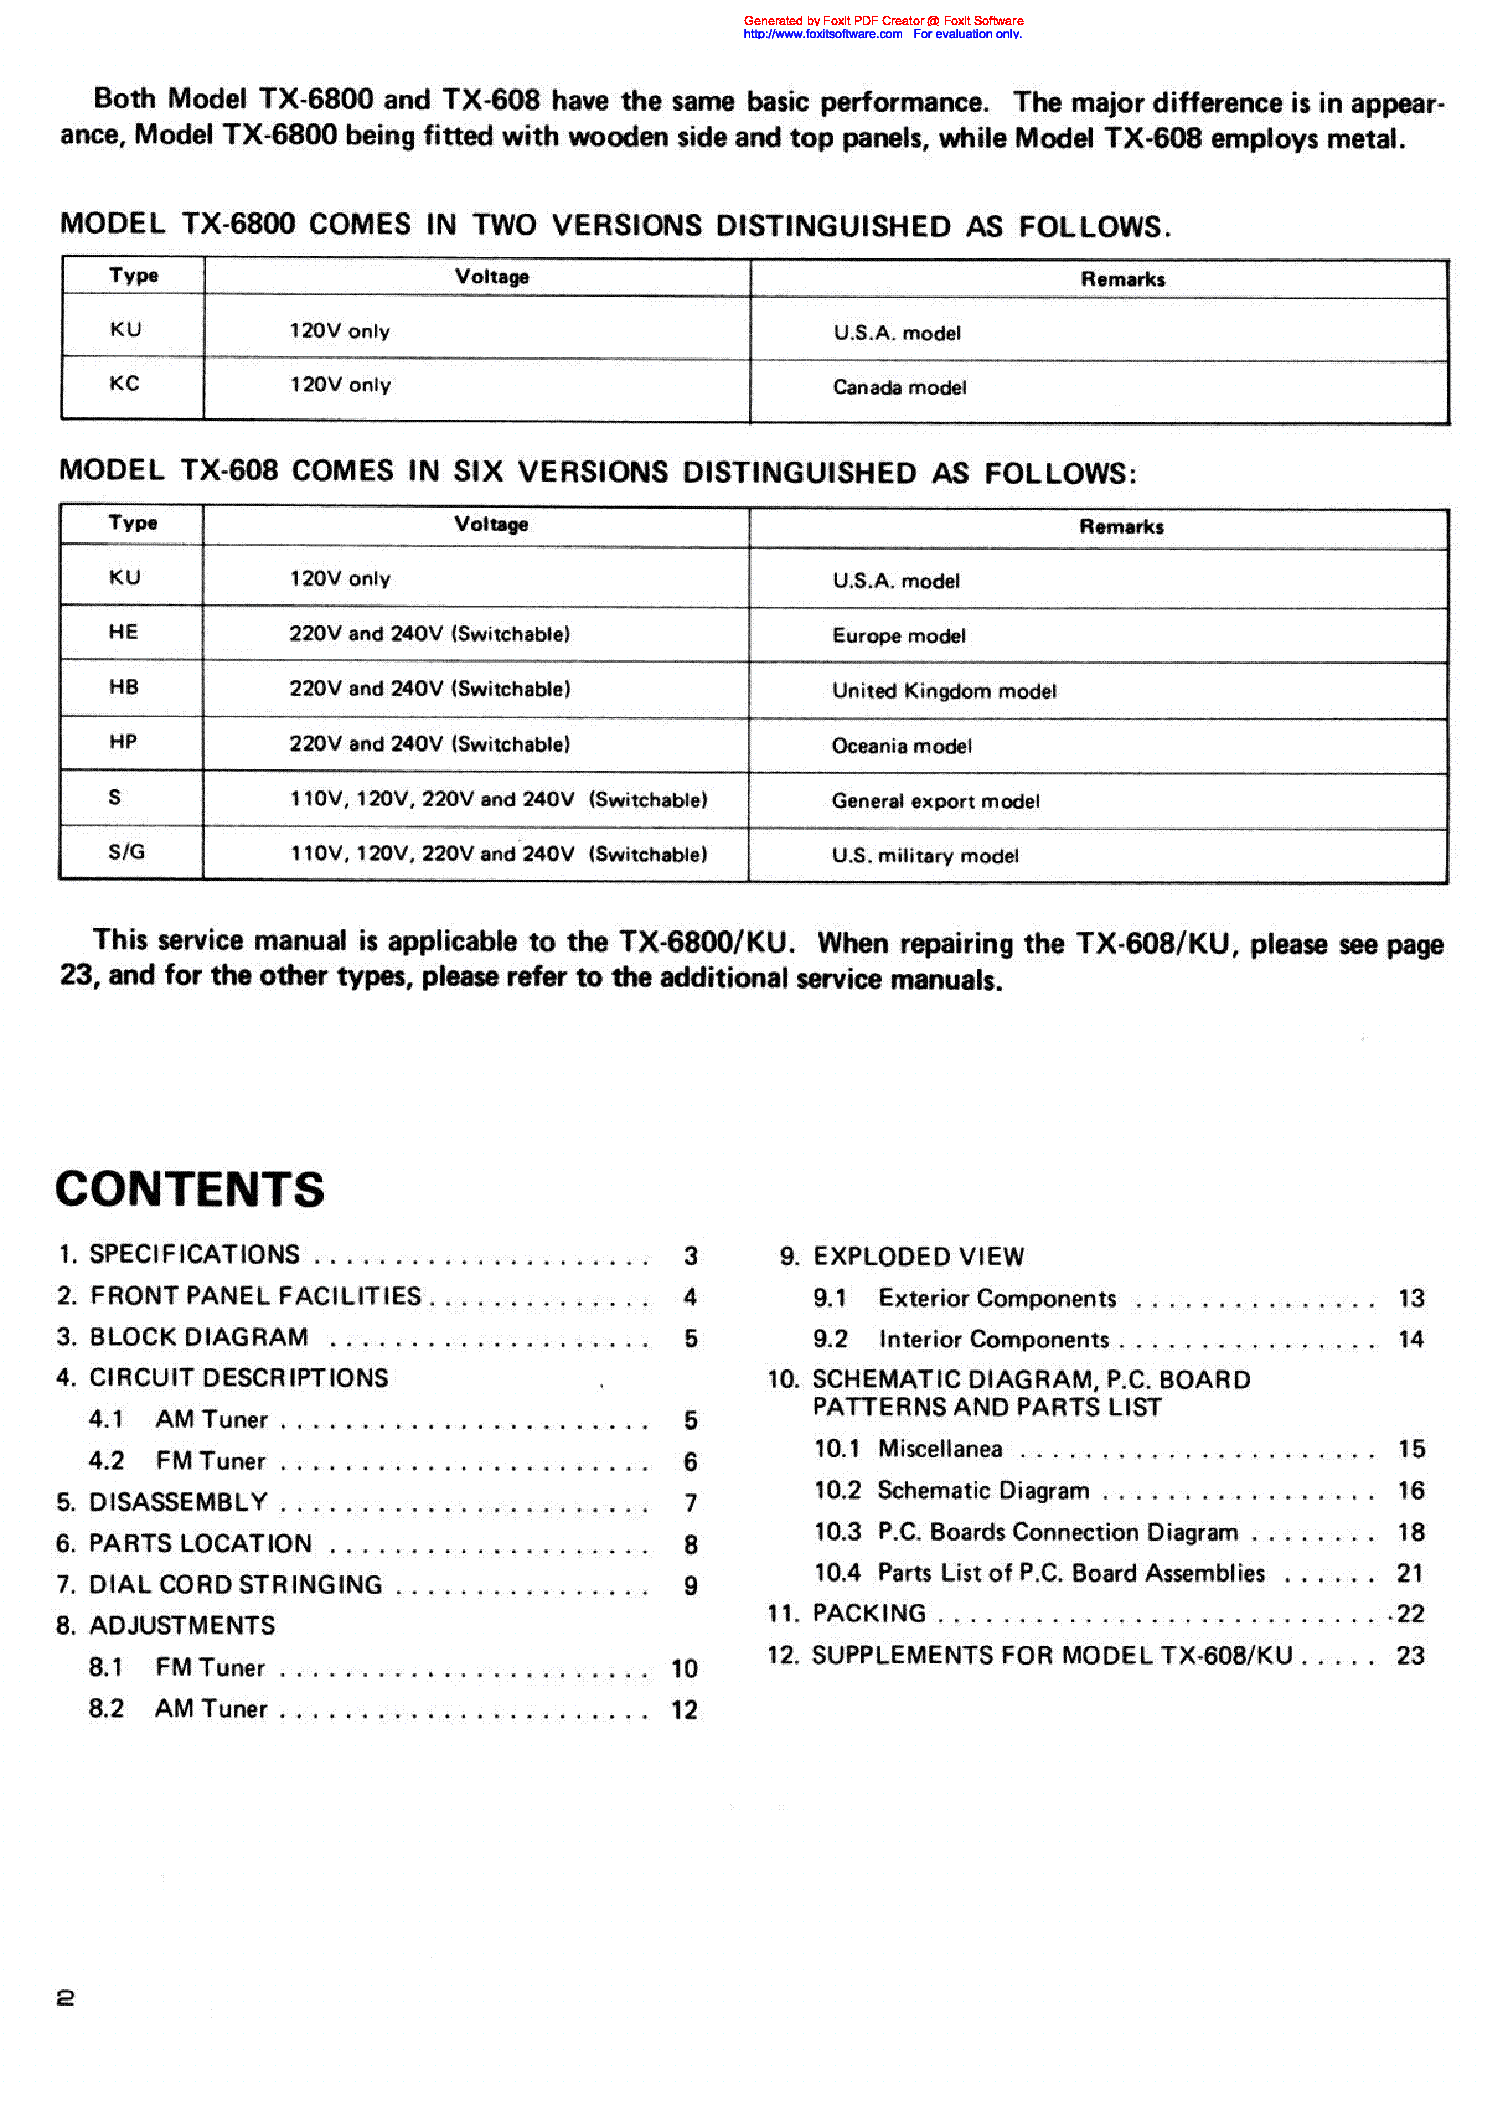 PIONEER TX-608 6800 SM service manual (2nd page)